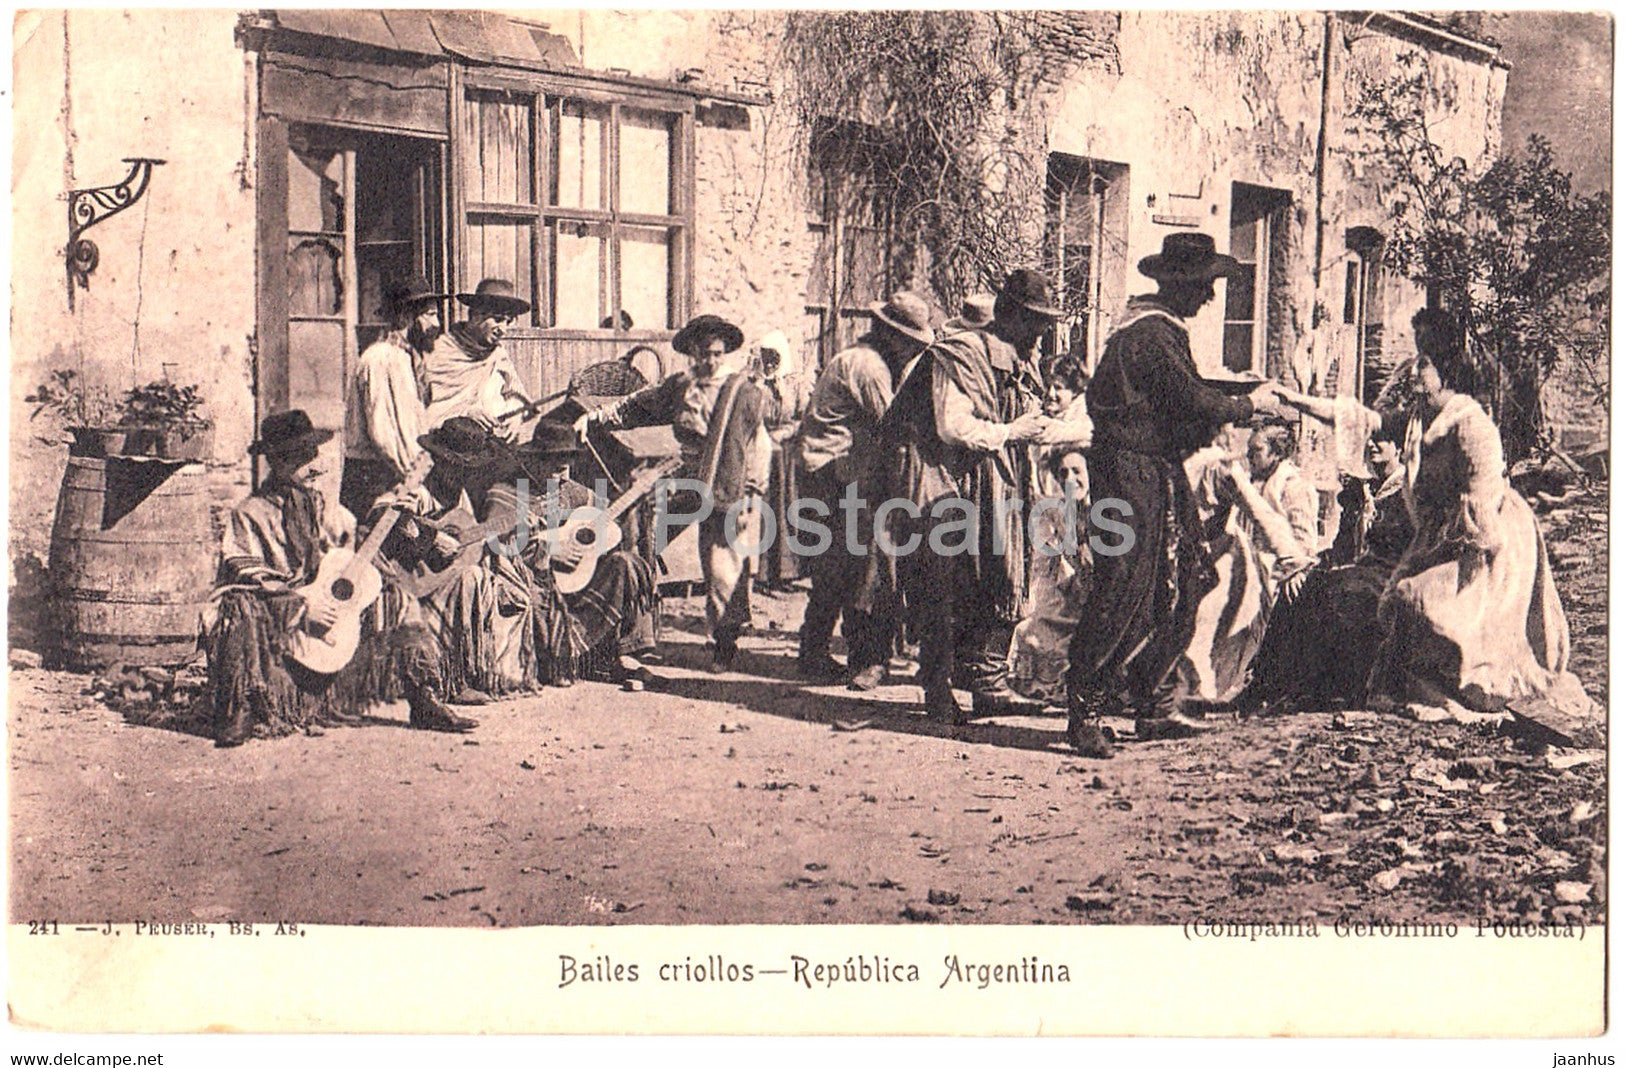 Bailes criollos - Rebublica Argentina - Criollo people - dance - music - 241 - old postcard - 1912 - Argentina - used - JH Postcards